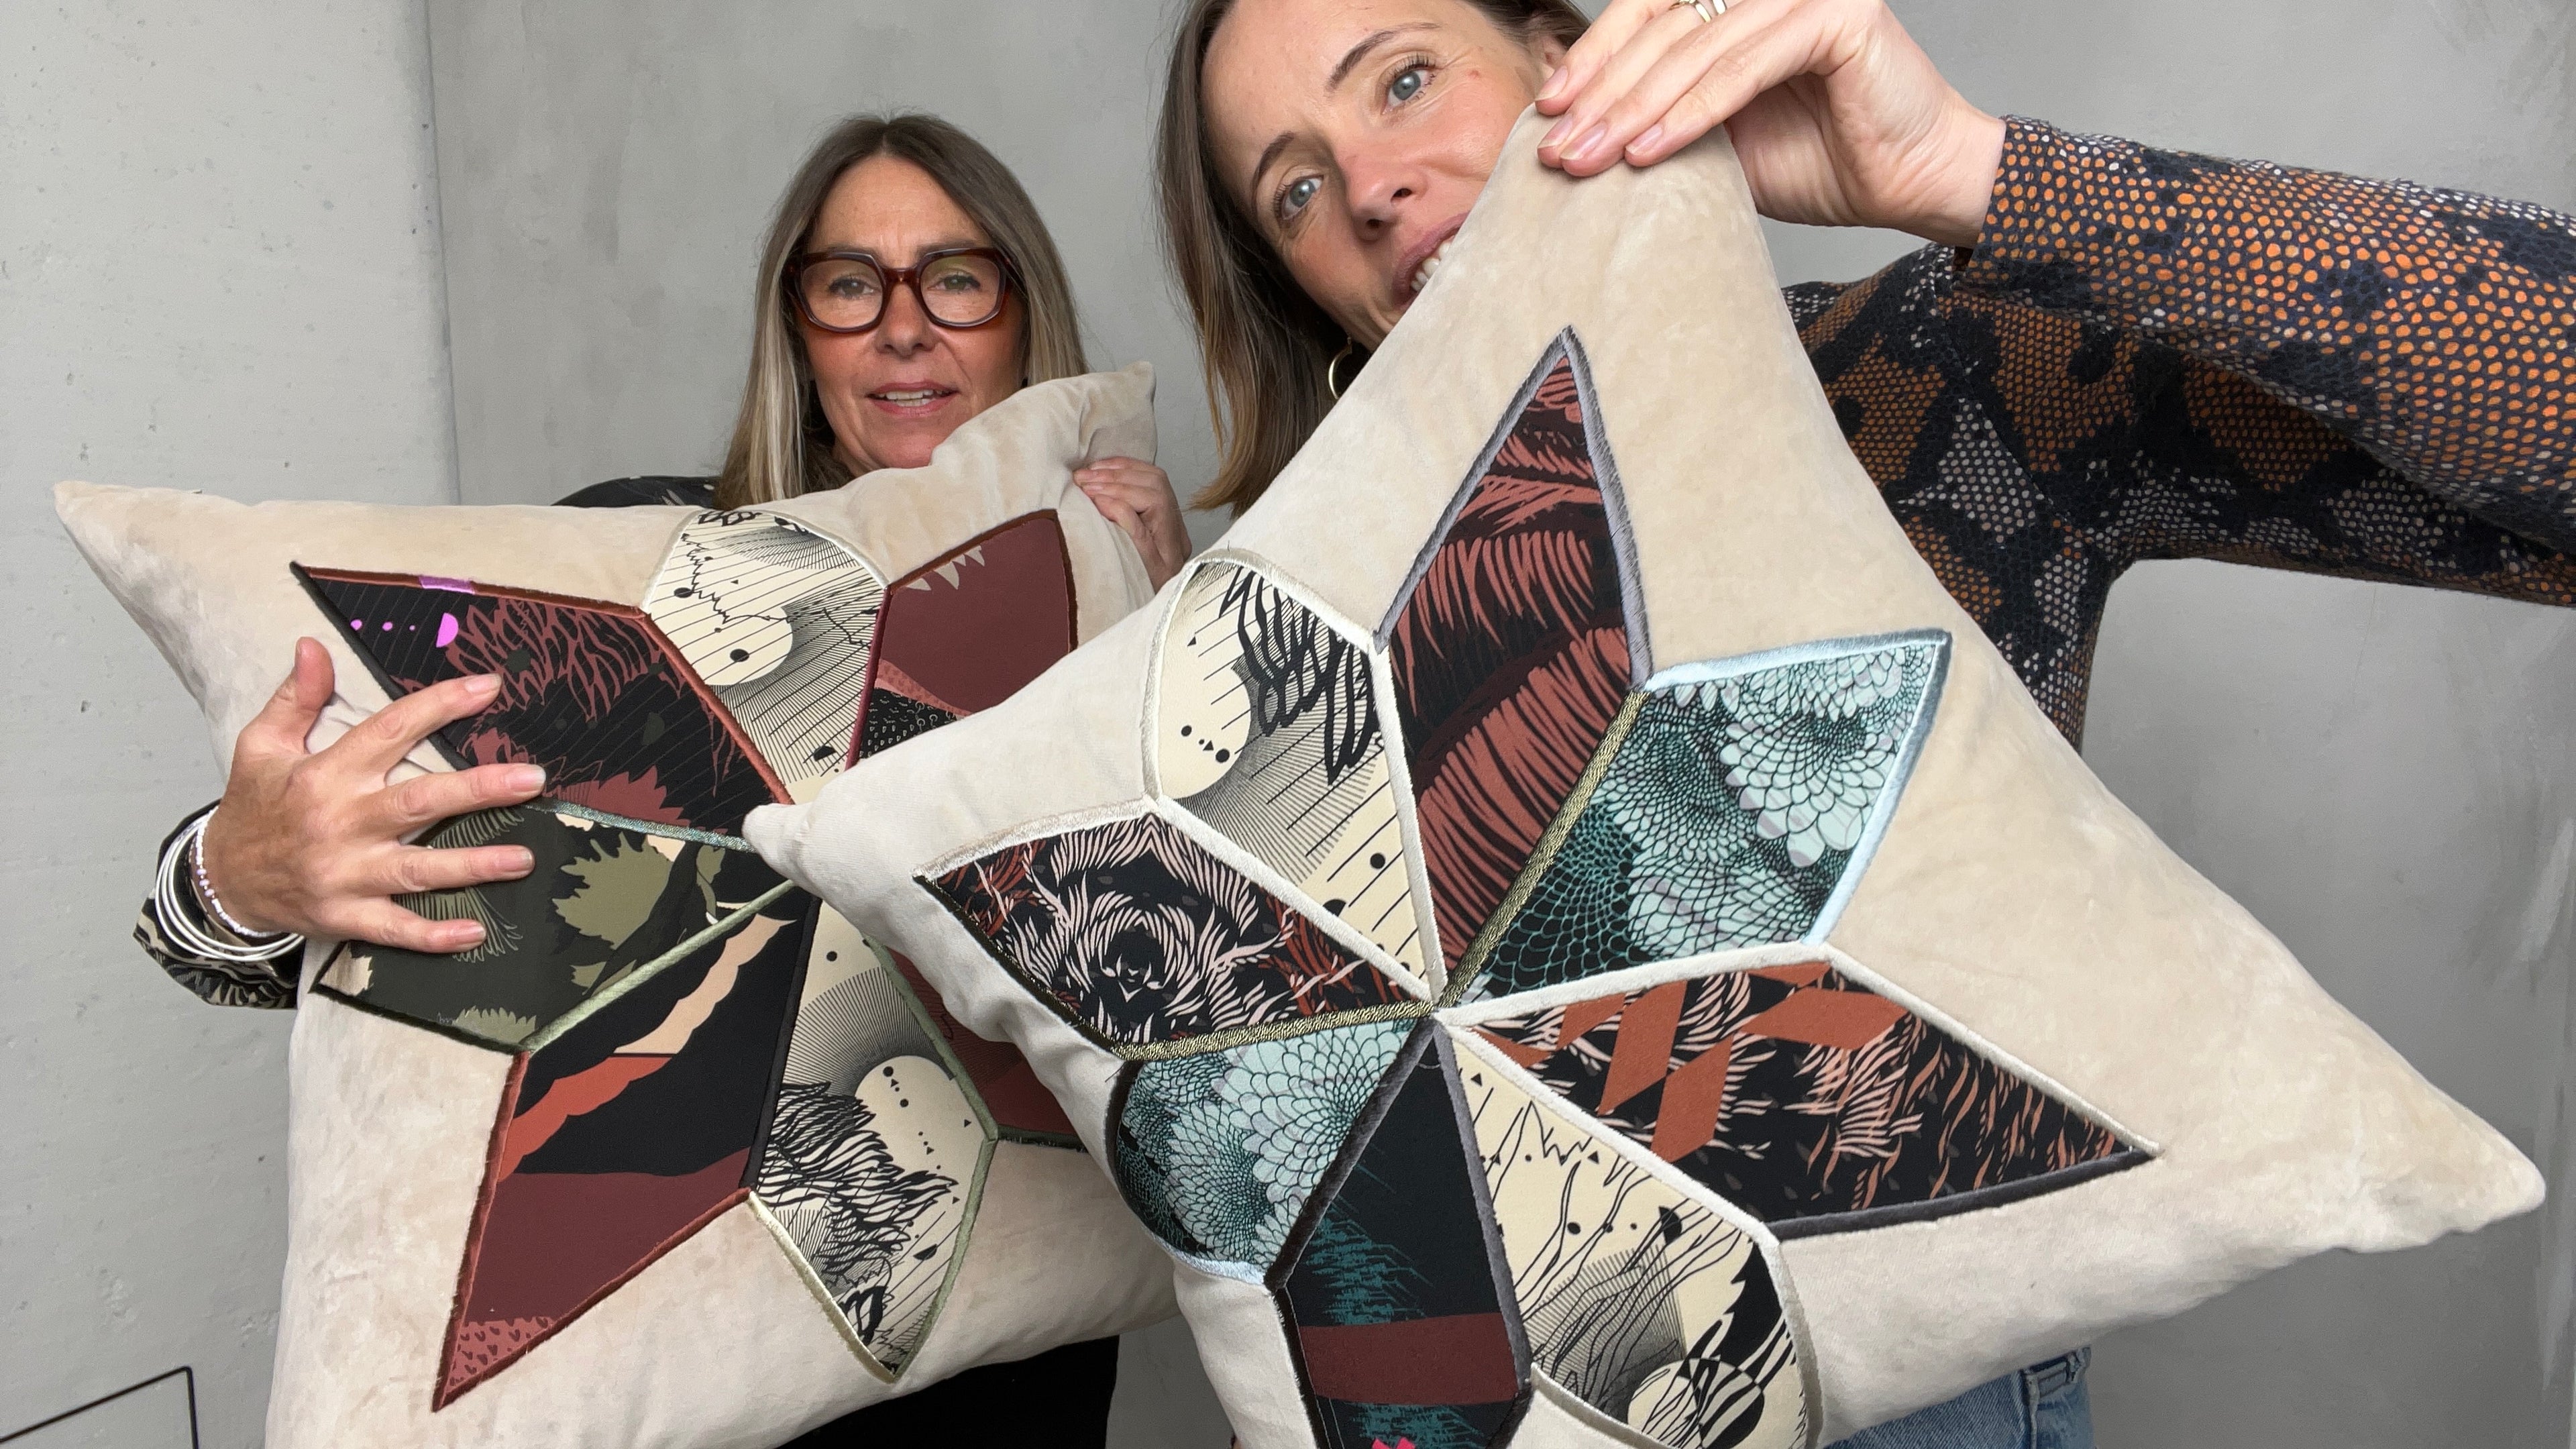 Sophie Darling & Ellie Mac holding a cushion each from their collection